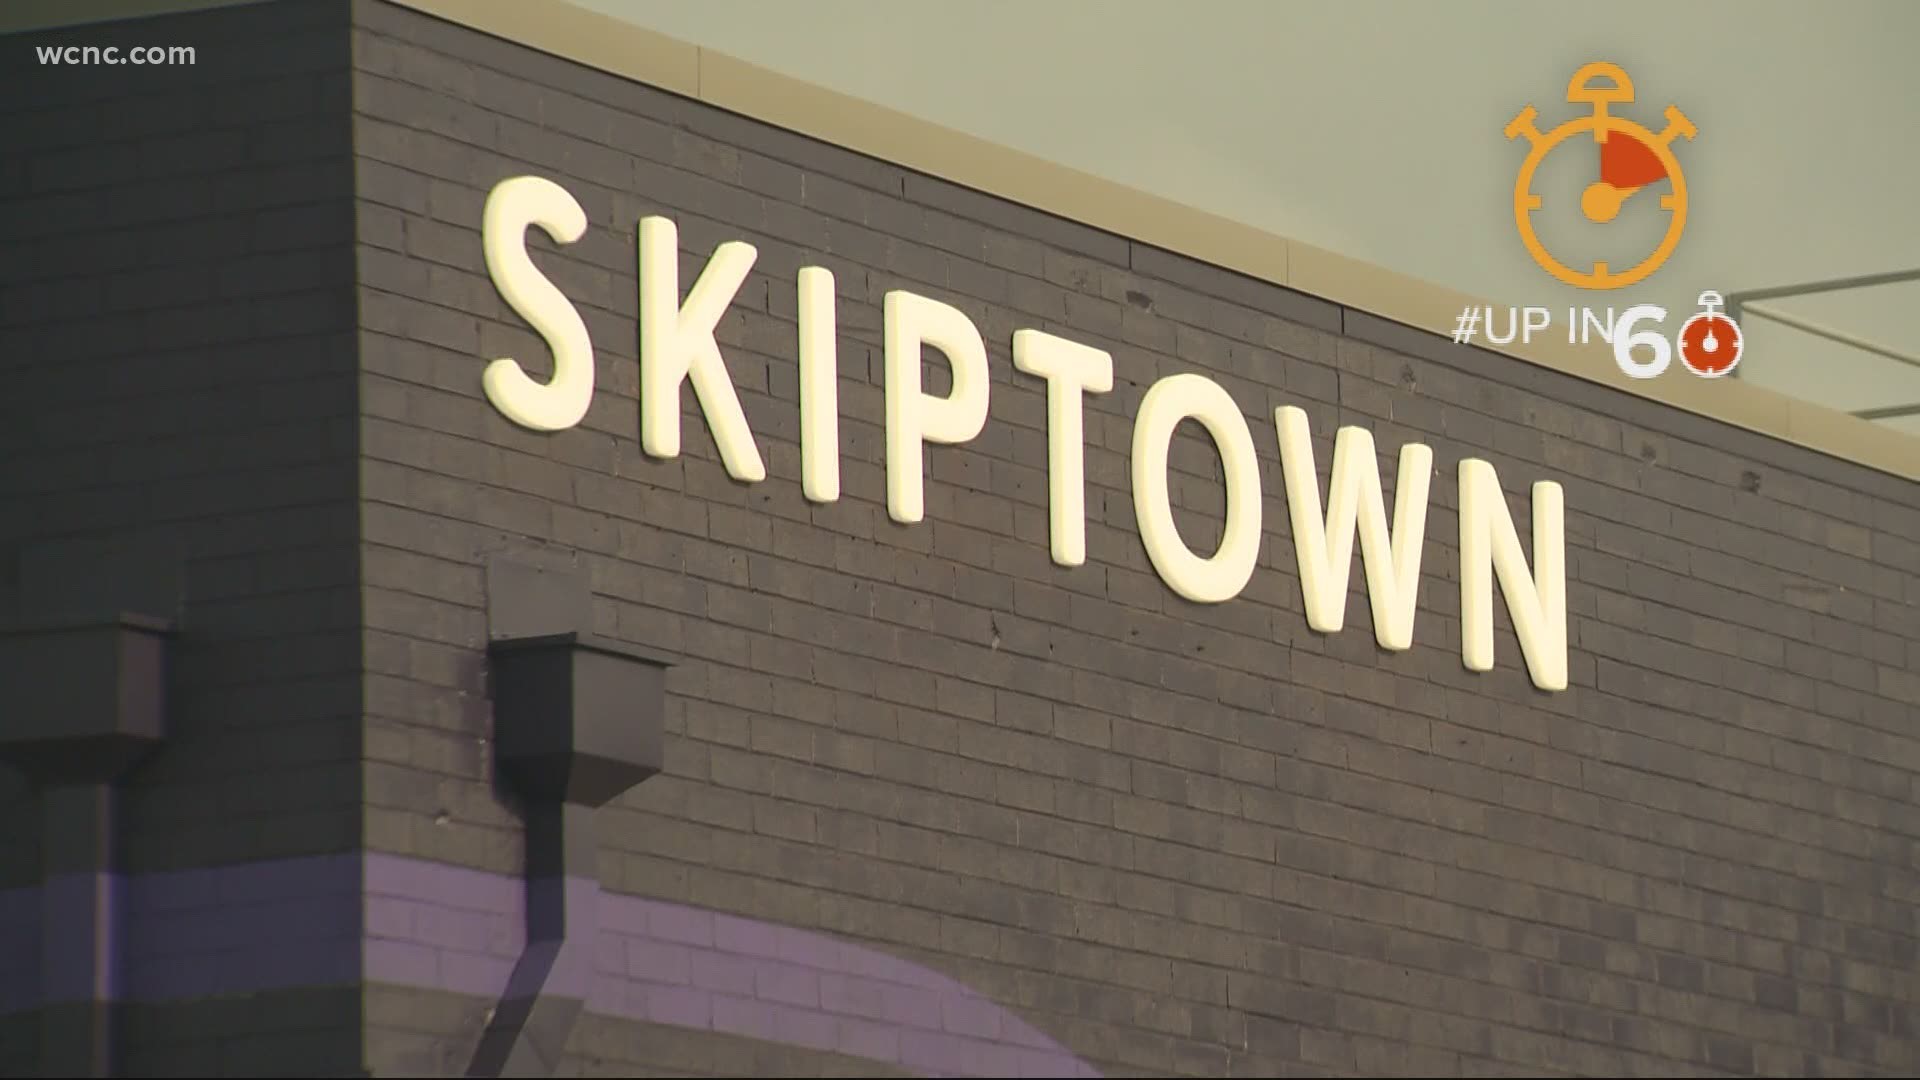 Skiptown is like a country club for dogs complete with off-leash dog park & even a doggie beer.